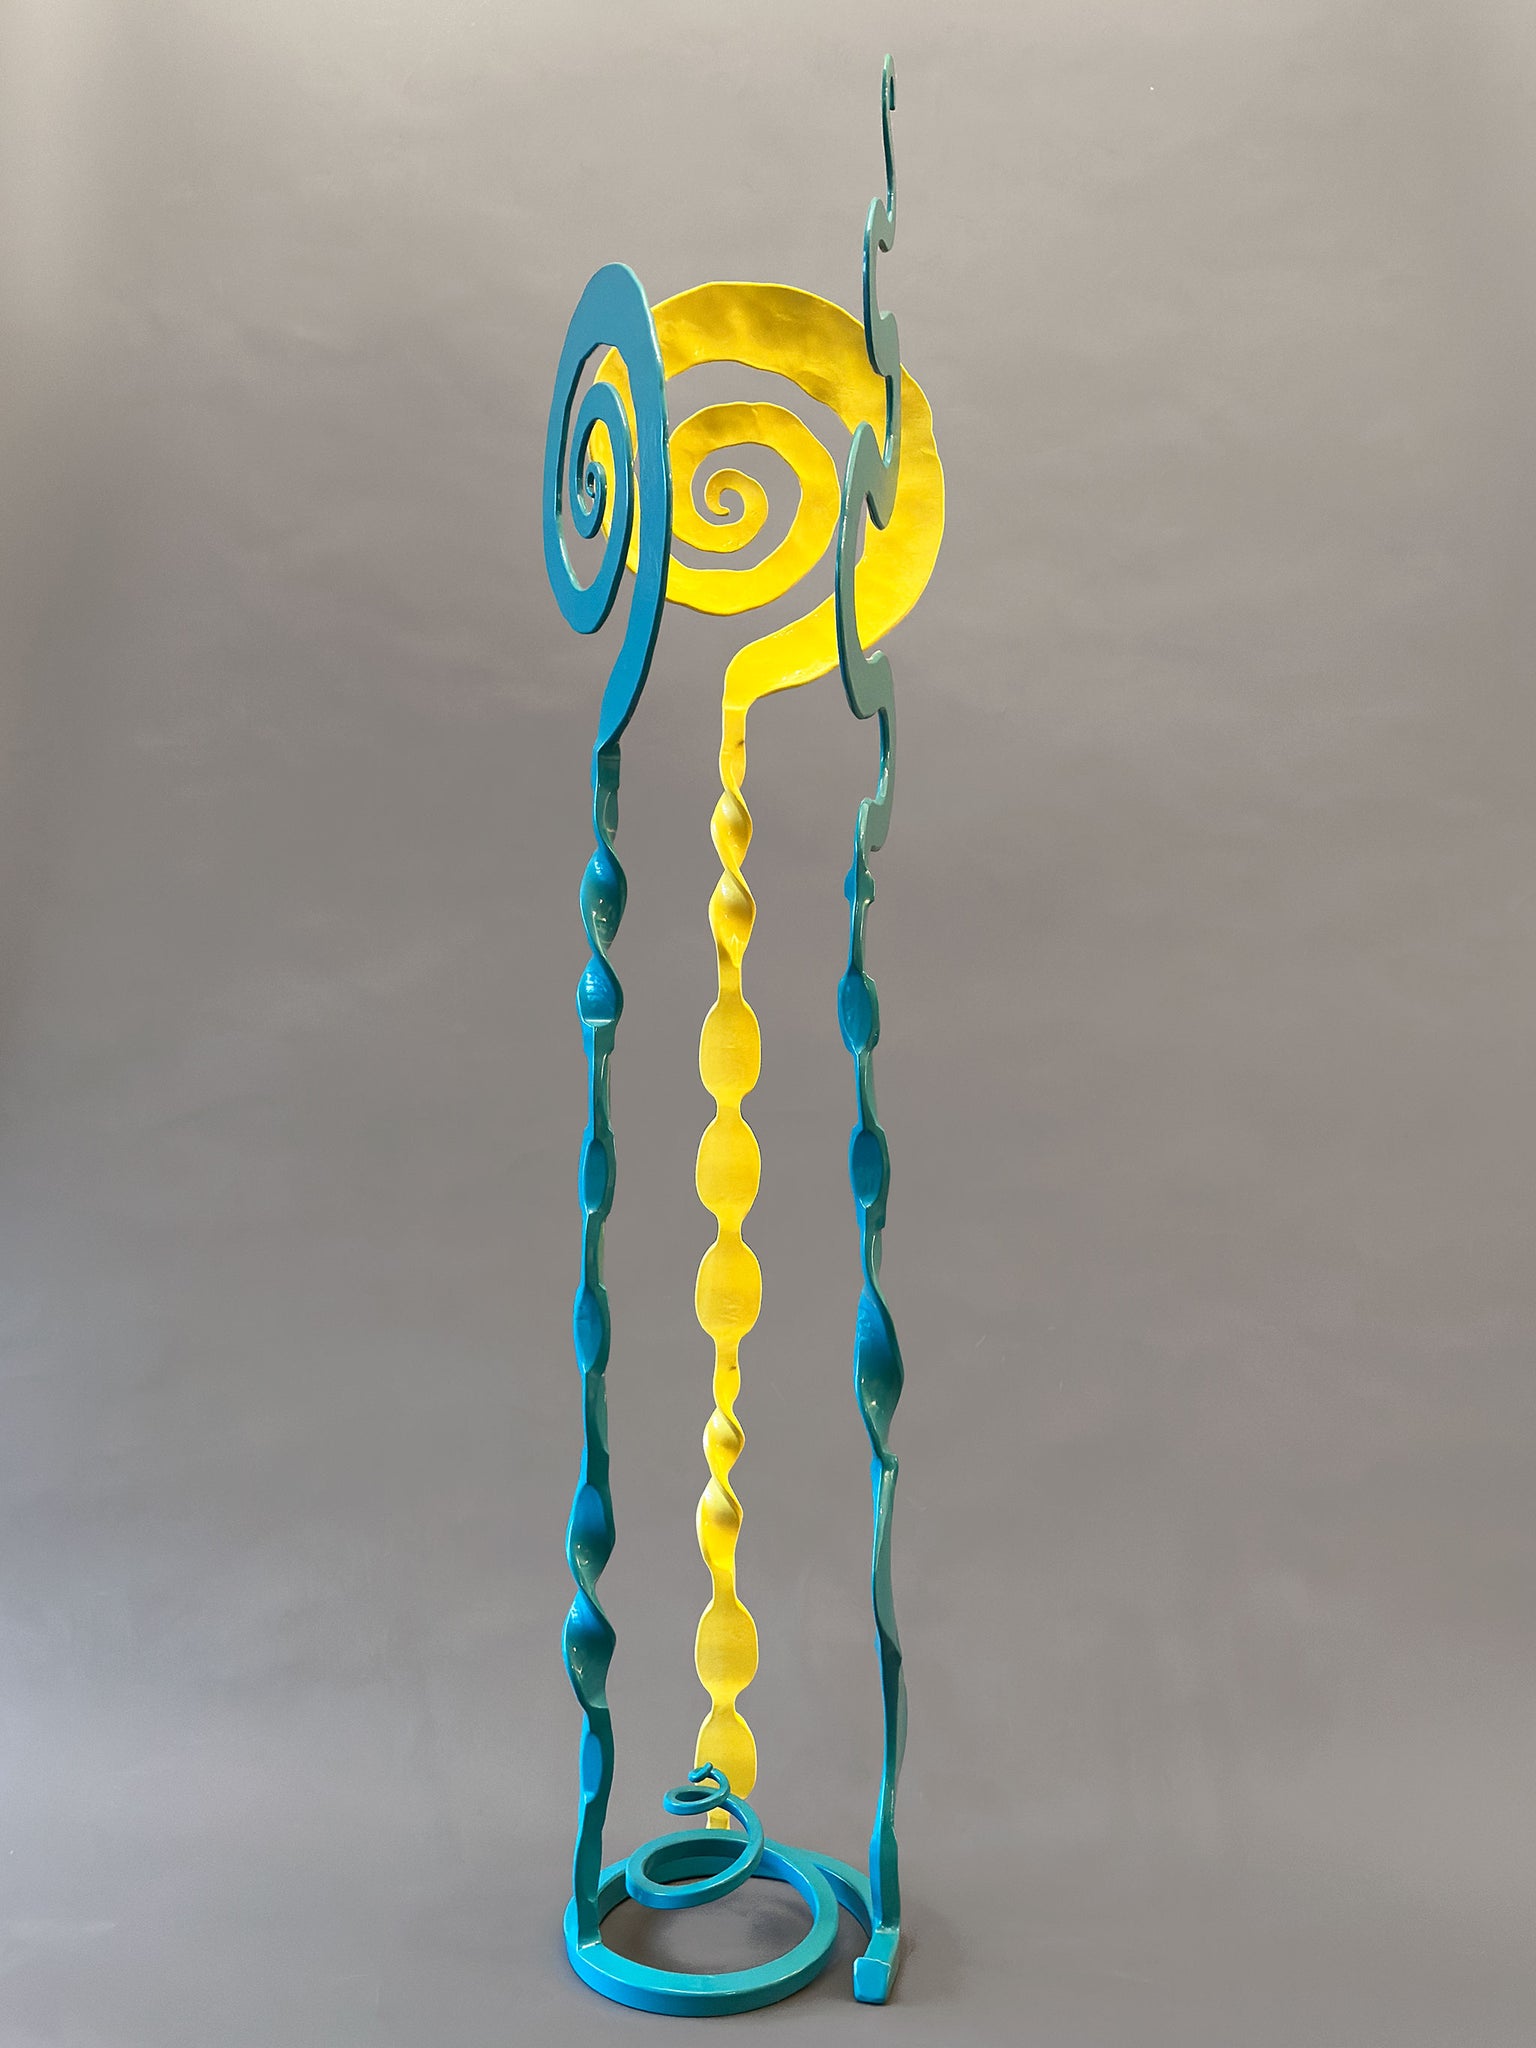 Turquoise and Yellow small sculpture that has two turquoise elements and one yellow element. All three elements are welded onto a spiral turquoise base,